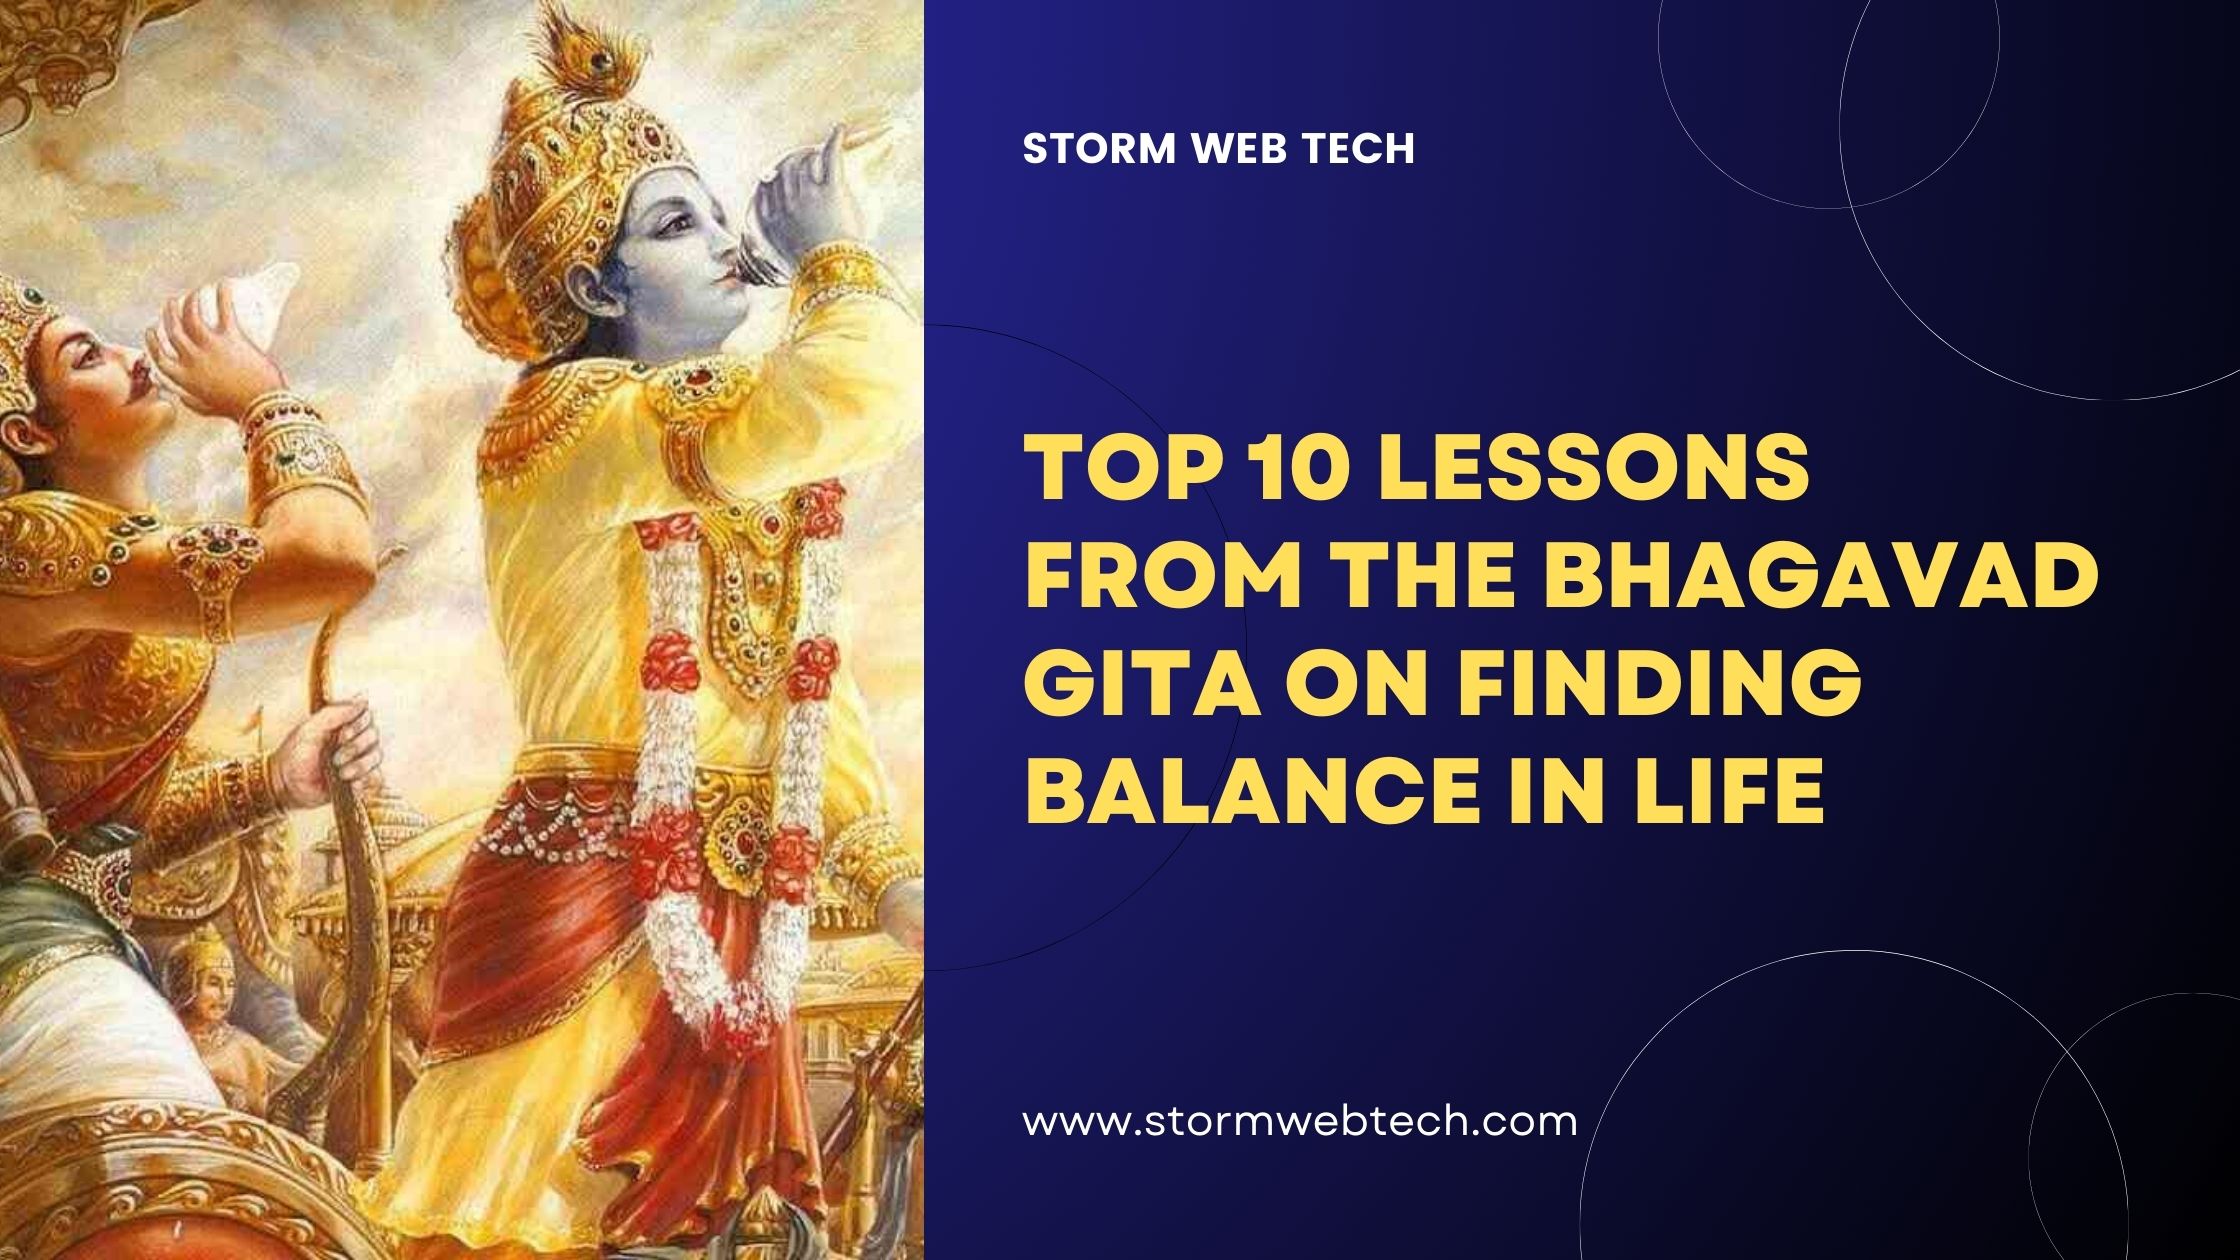 bhagavad gita offers profound insights into achieving equilibrium amidst life's chaos. top 10 lessons from the bhagavad gita on finding balance in life